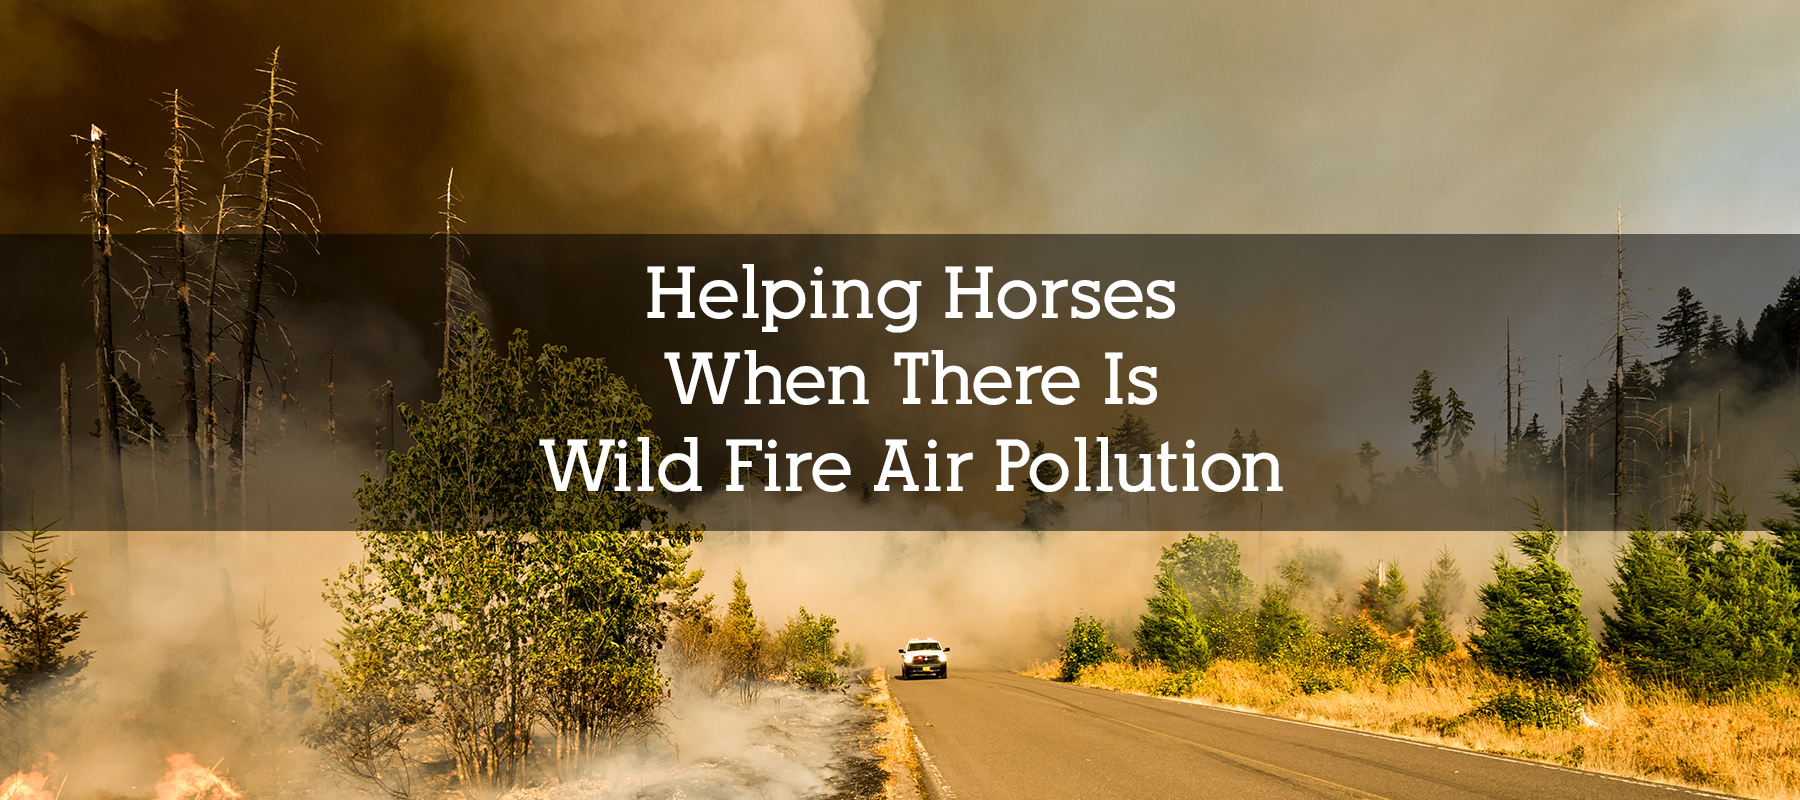 Helping Horsees with Wild Fire Air Pollution and Smoke